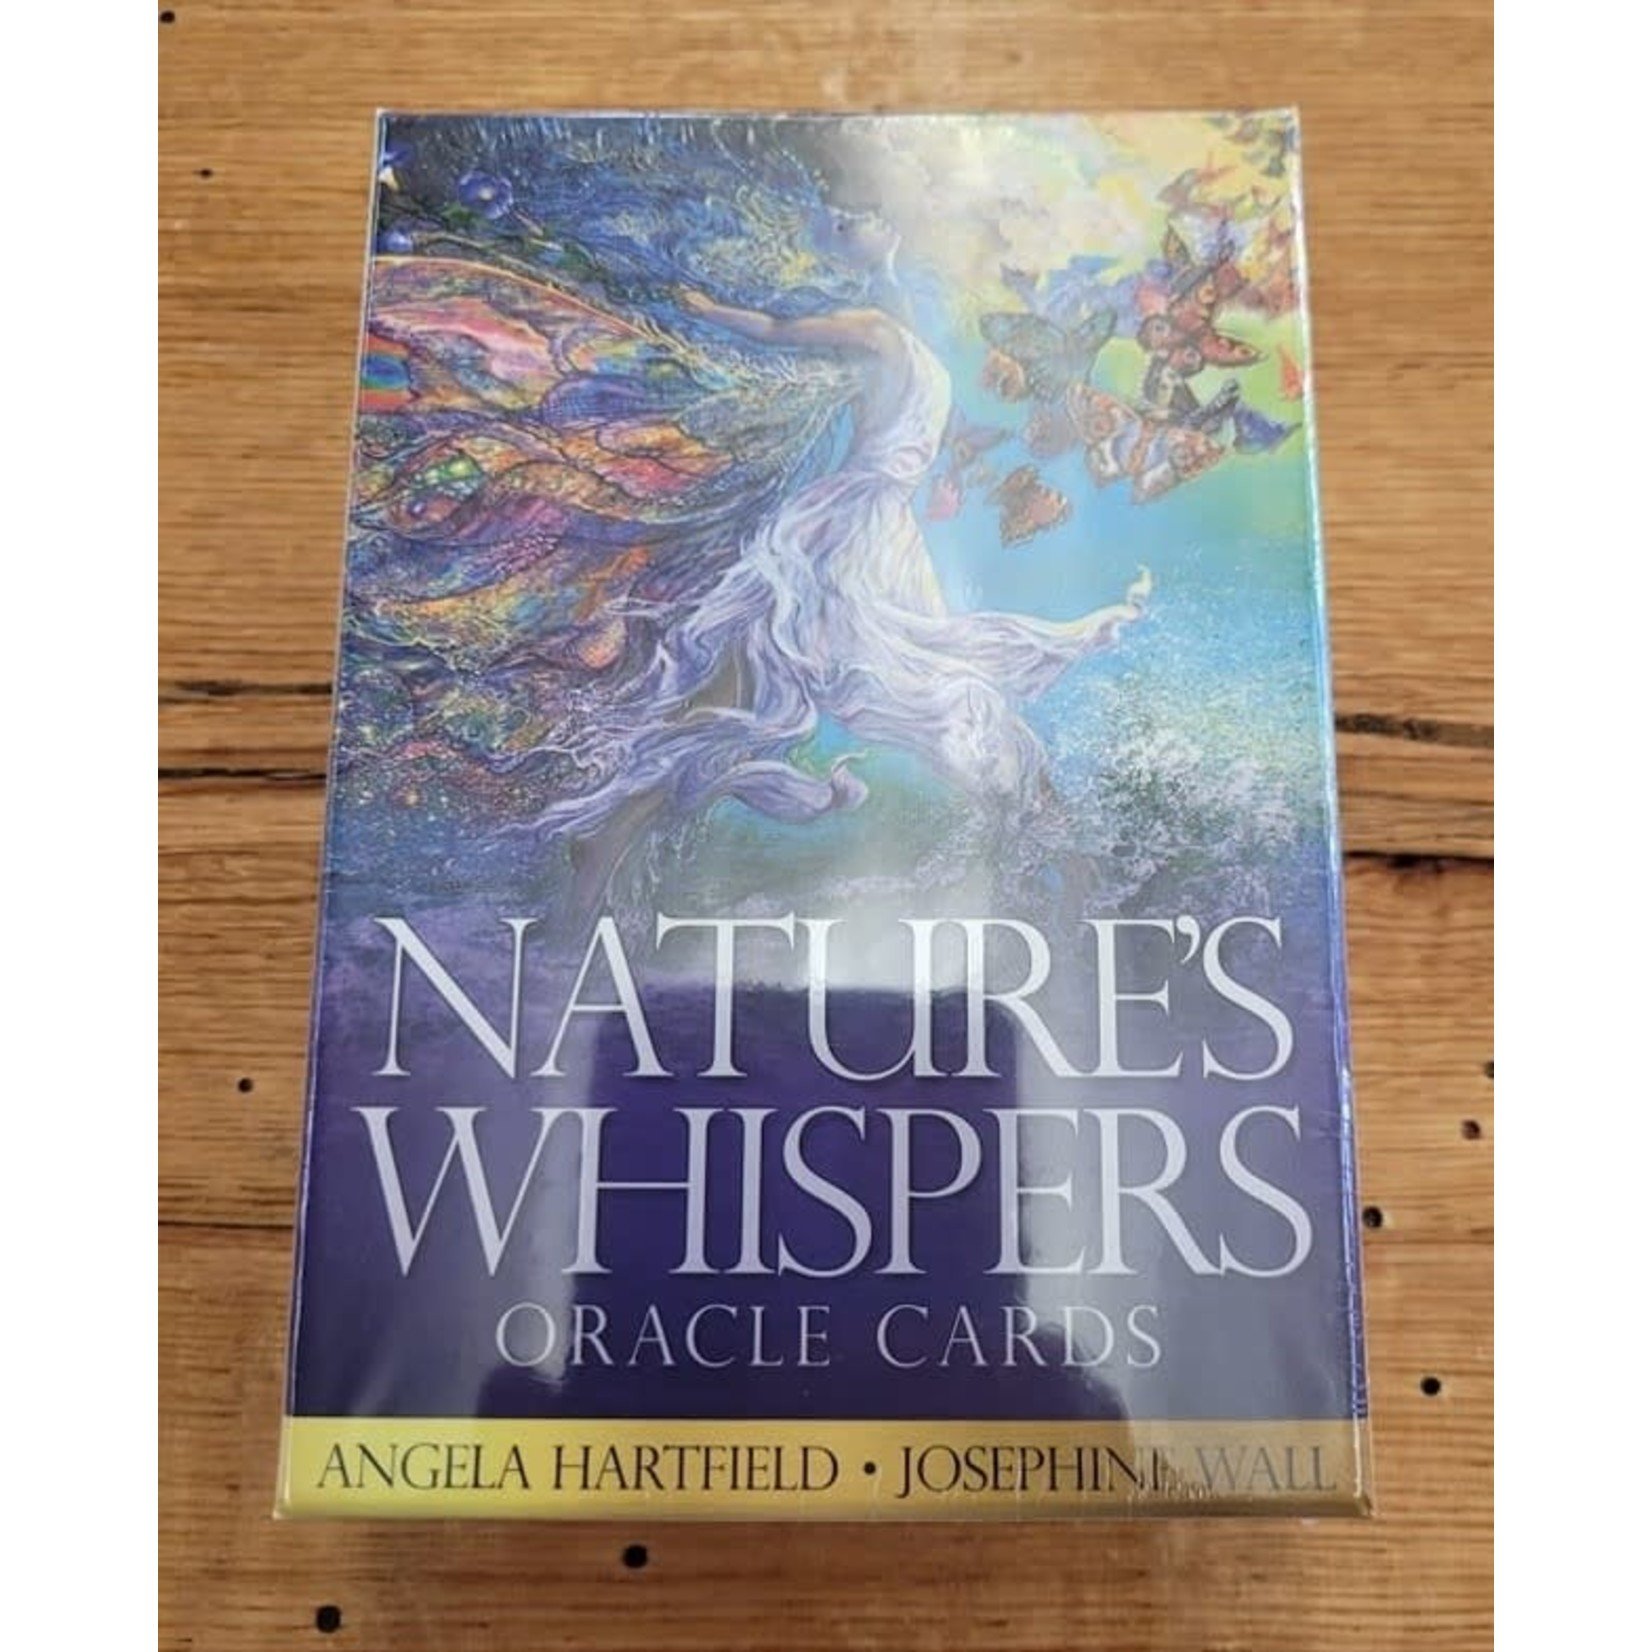 Nature's whispers